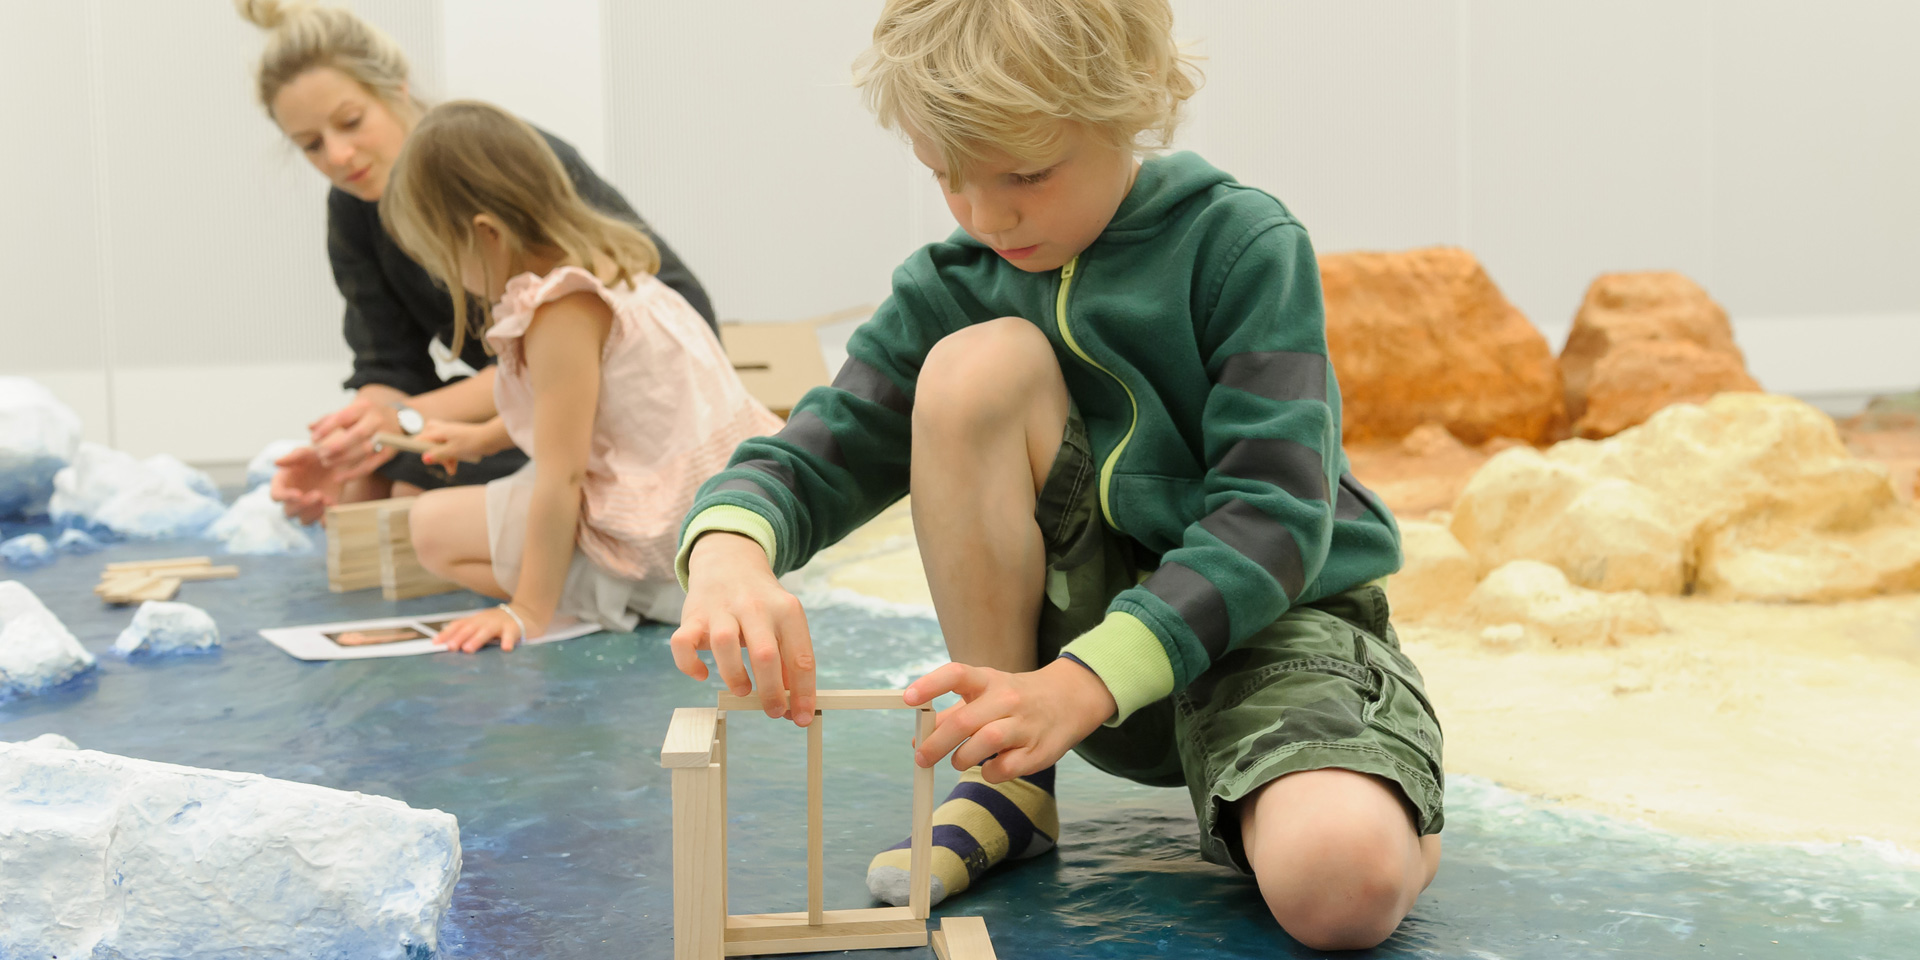 A child building with wooden blocks